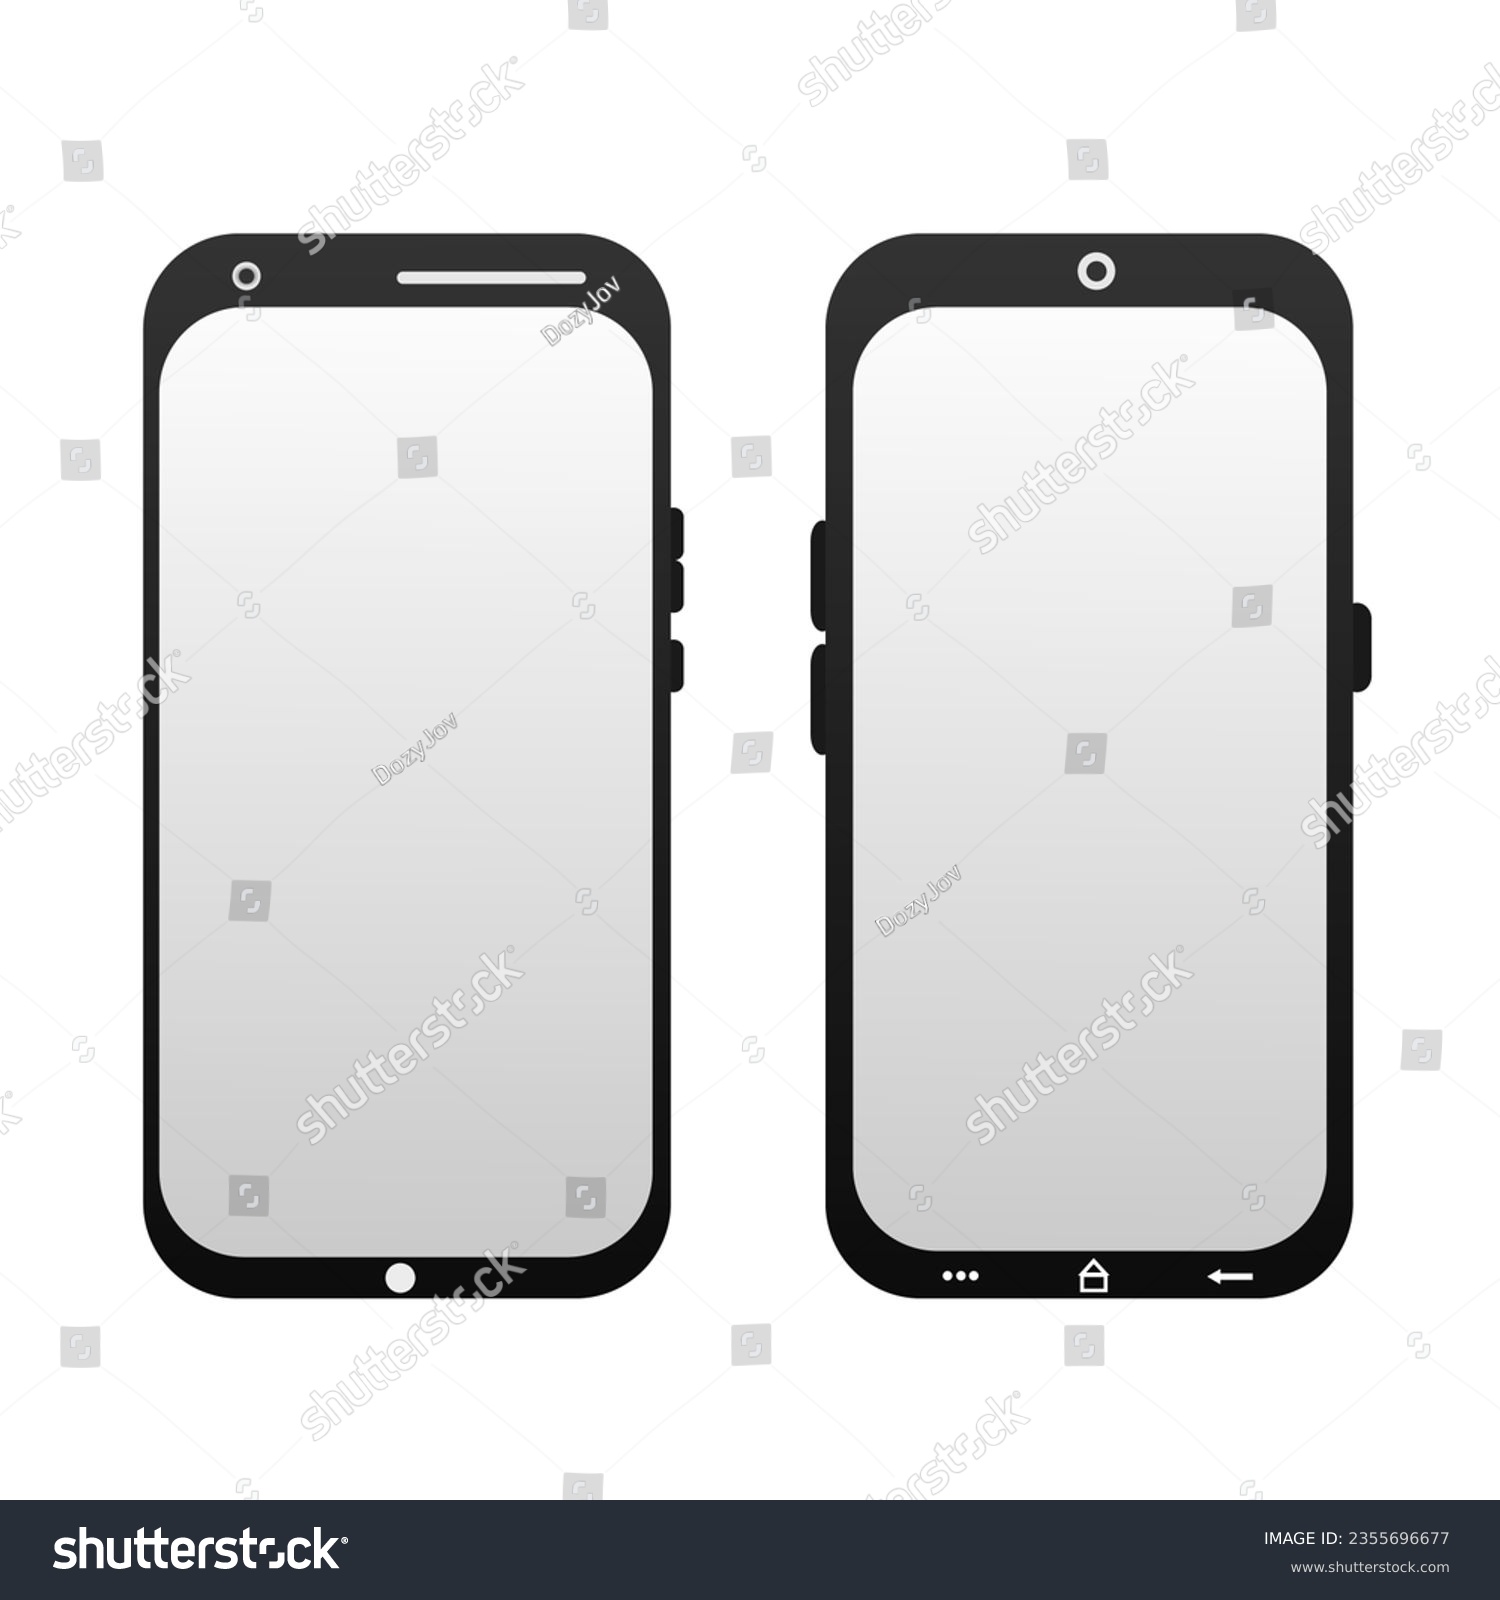 SVG of Smartphone two models with blank copy space and editable screen for advertisements svg